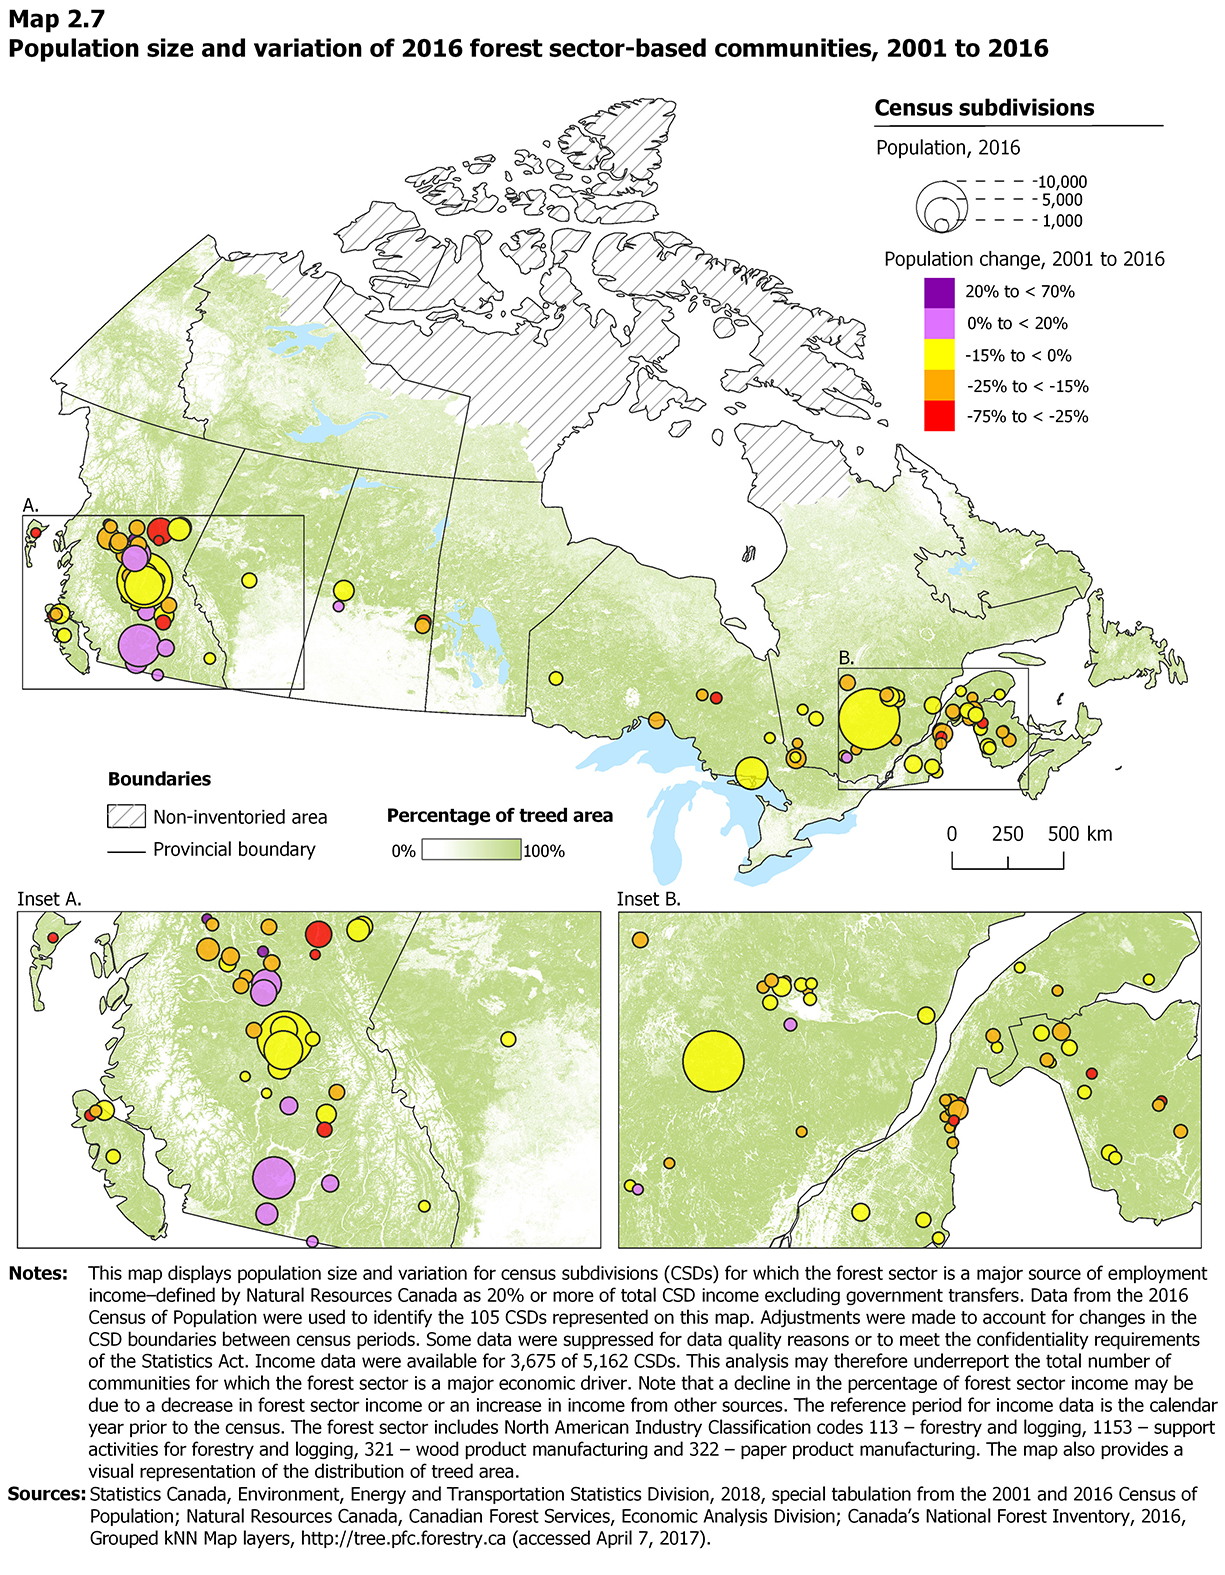 Map 2.7 Population size and variation of 2016 forest sector-based communities, 2001 to 2016